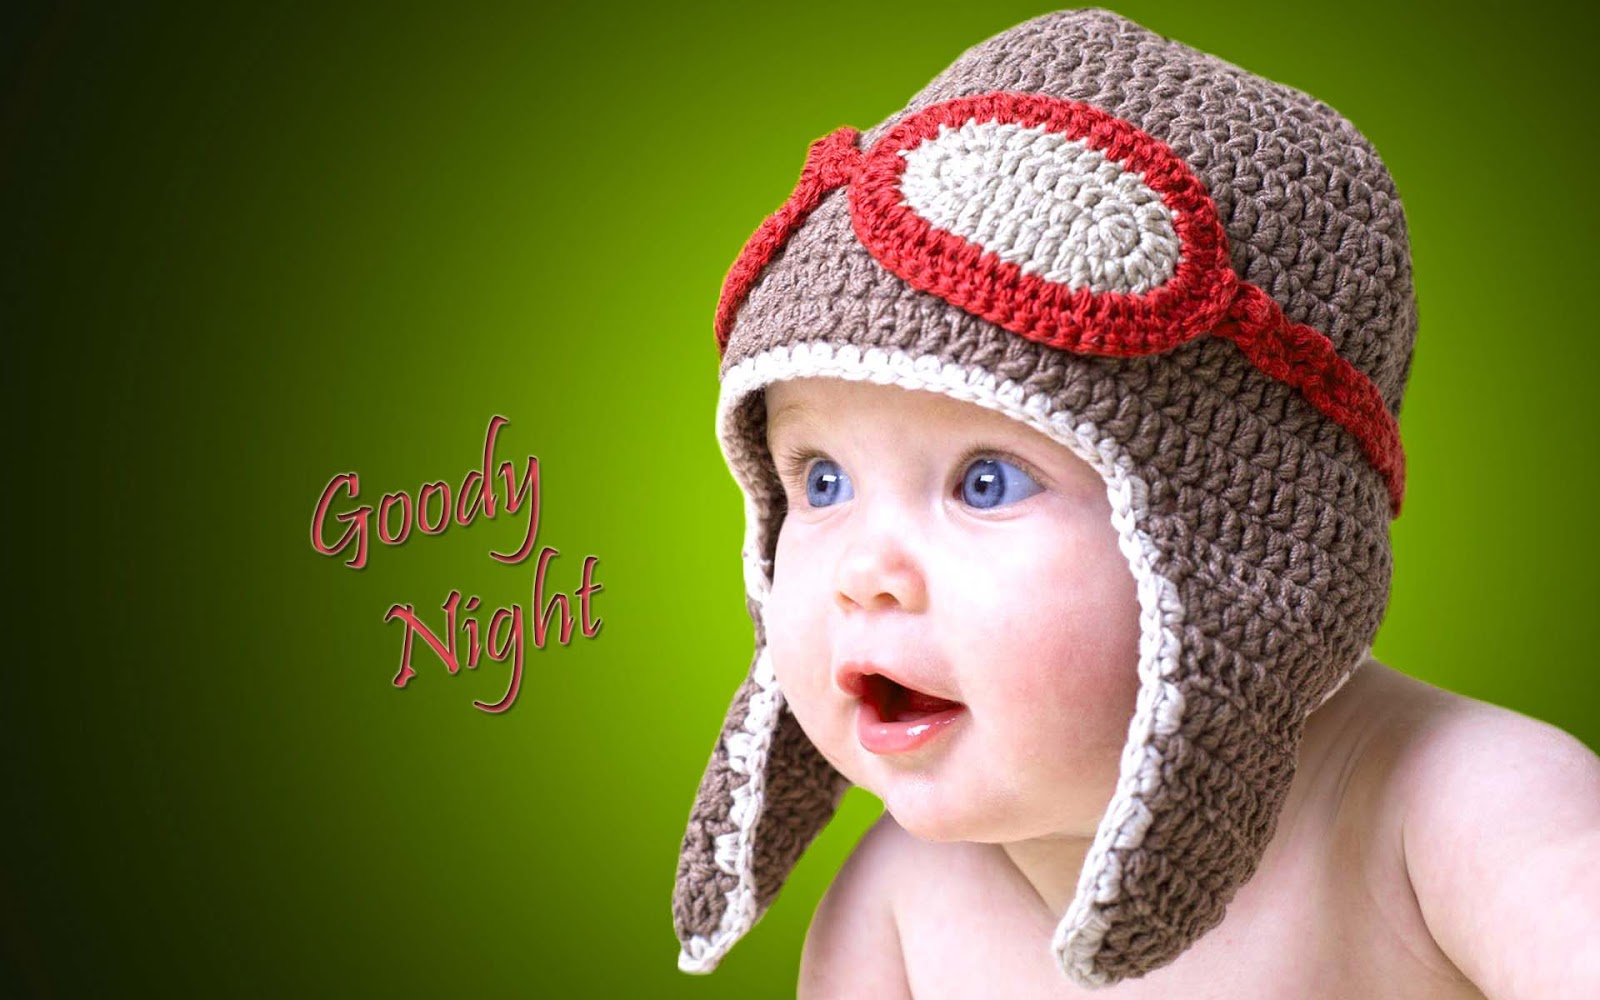 cute good night wallpapers,child,knit cap,beanie,clothing,cap